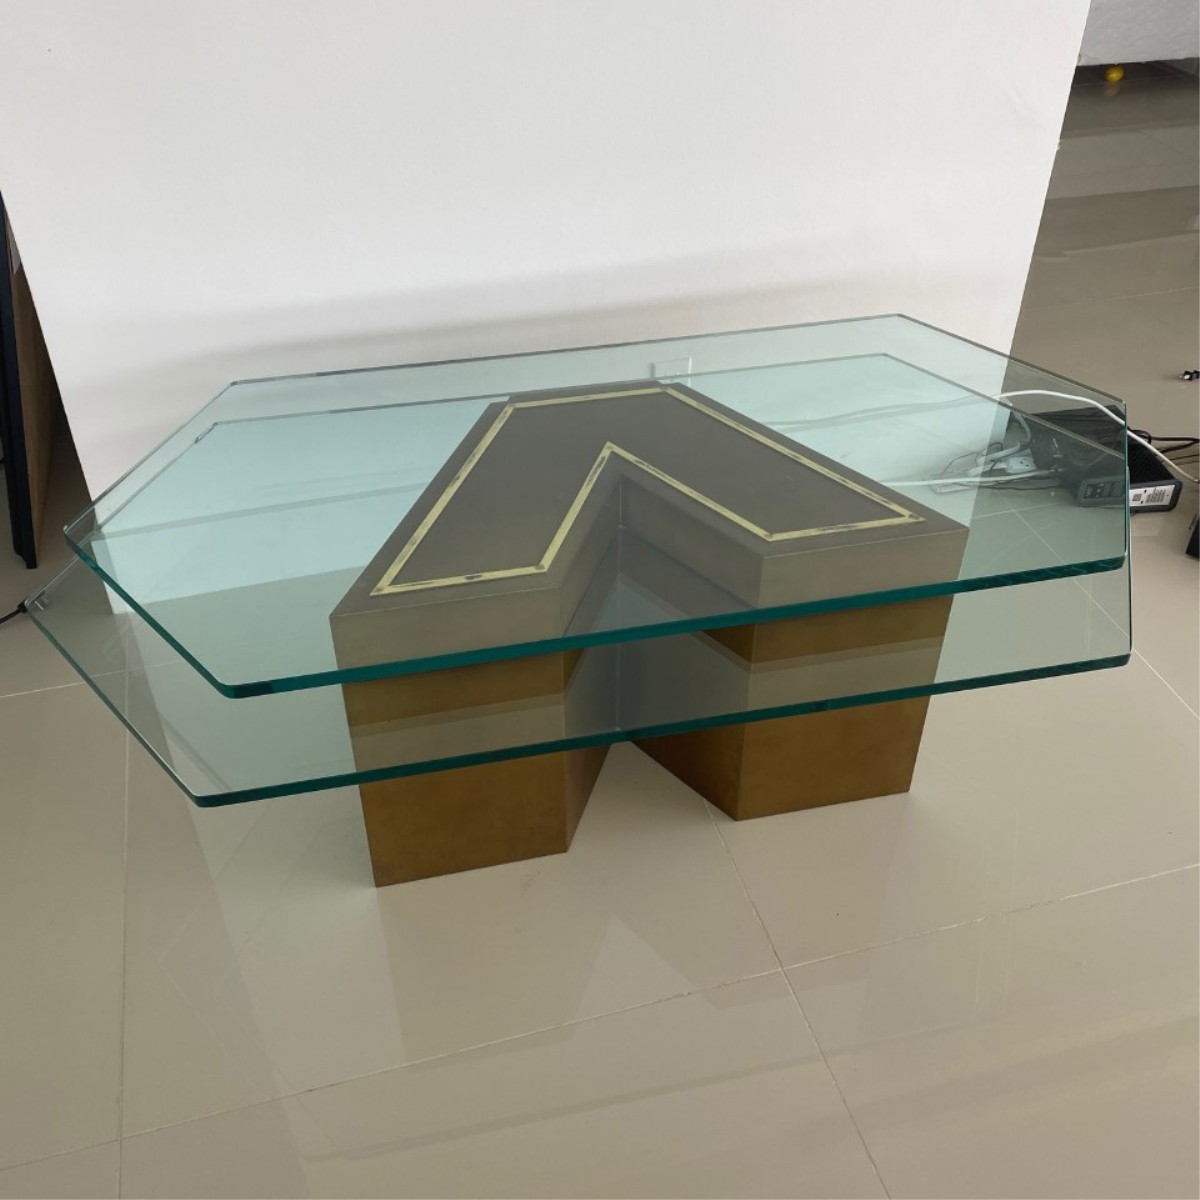 Ron Seff, American (20C) Two Tiered Coffee Table